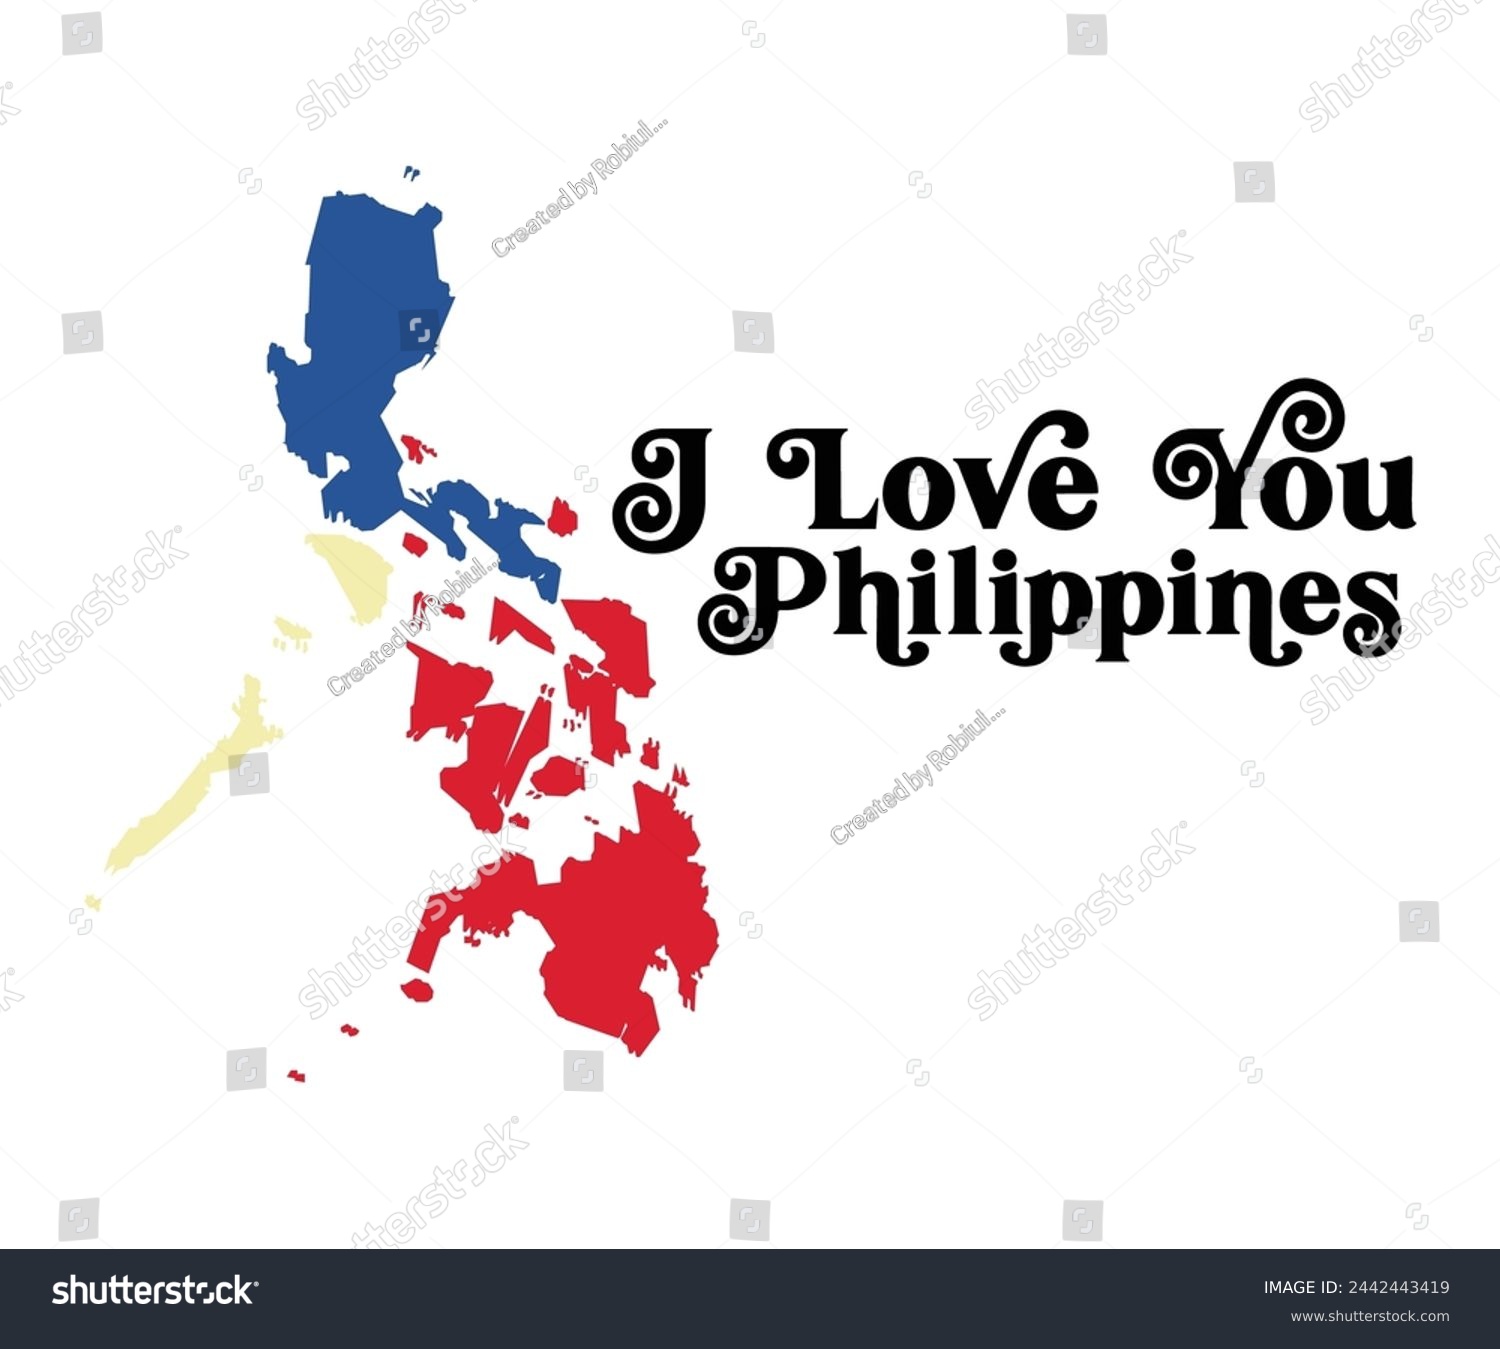 SVG of Philippines T-shirt Svg,Philippines Lover Shirt,Philippines Shirt, Philippines T Shirt, Filipino Roots,Cut File,Inastant Download svg